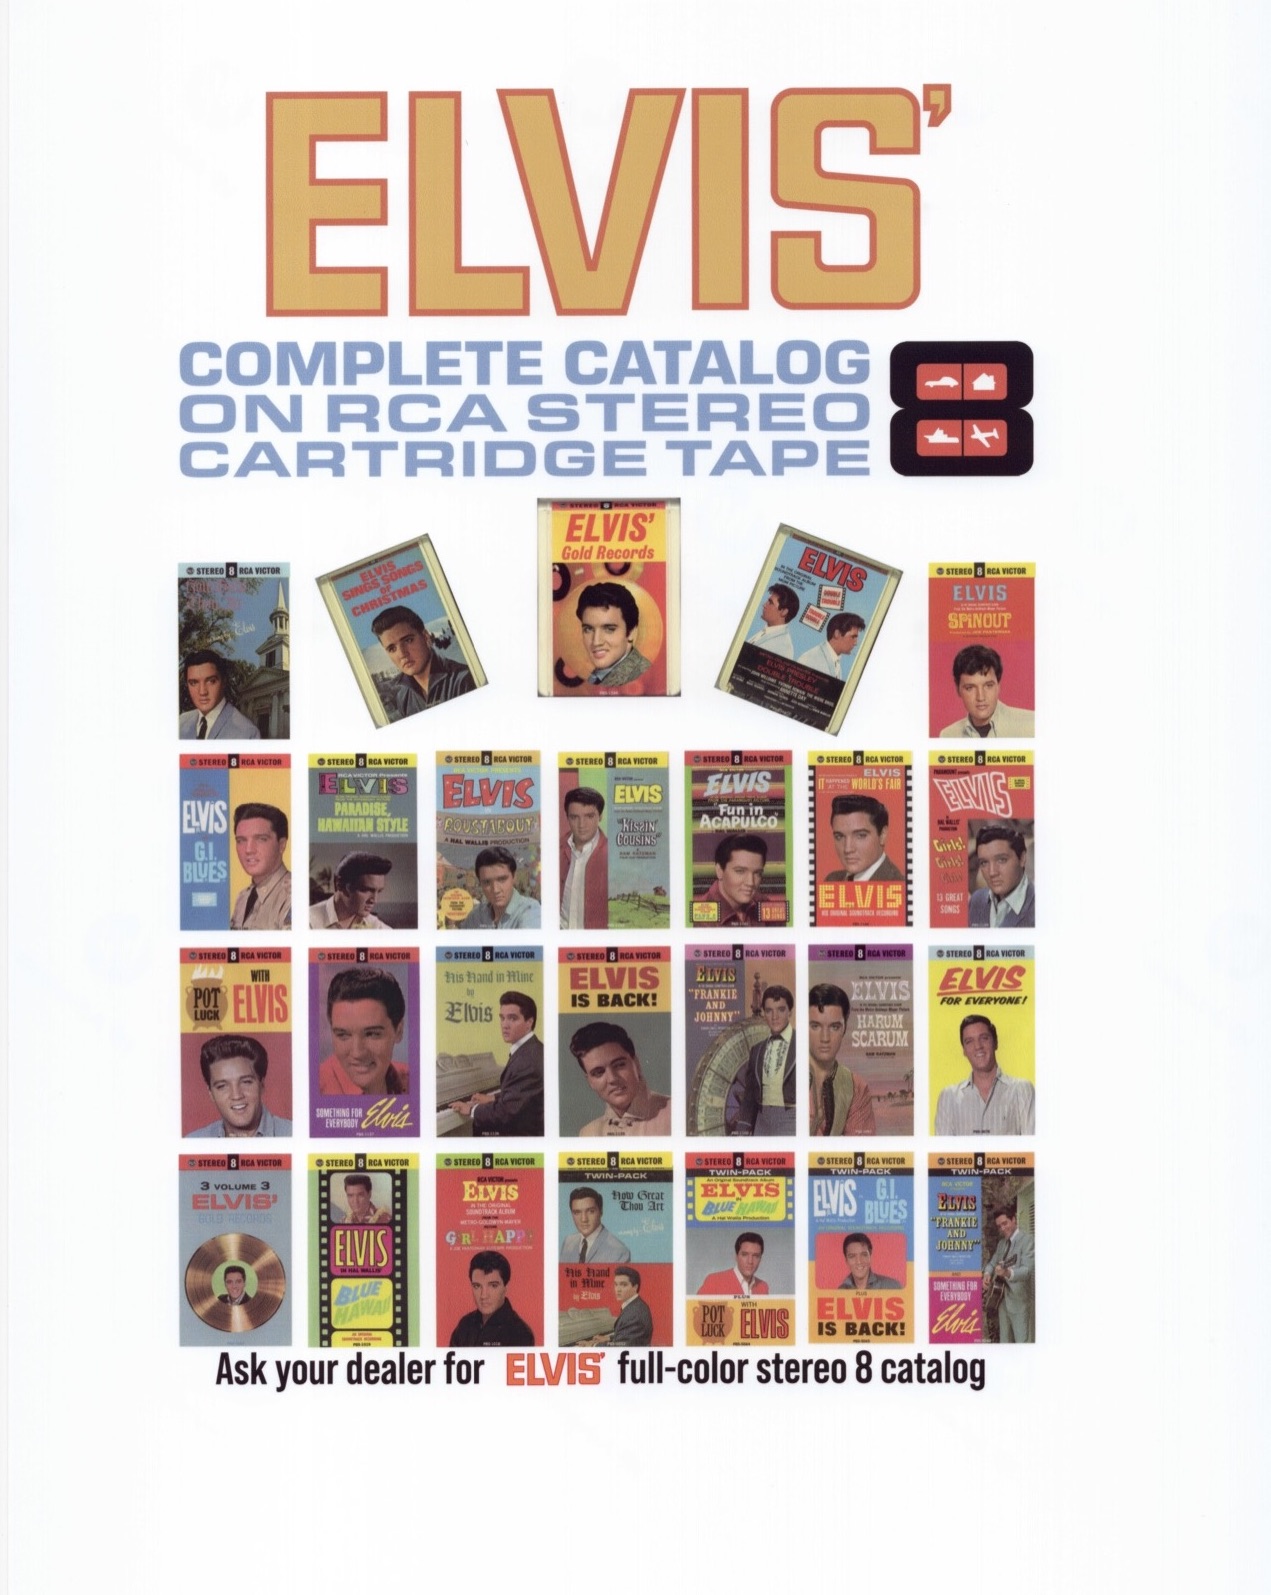 ’67 ELVIS’ Complete Catalog On RCA Stereo Cartridge Tape (Reproduction)